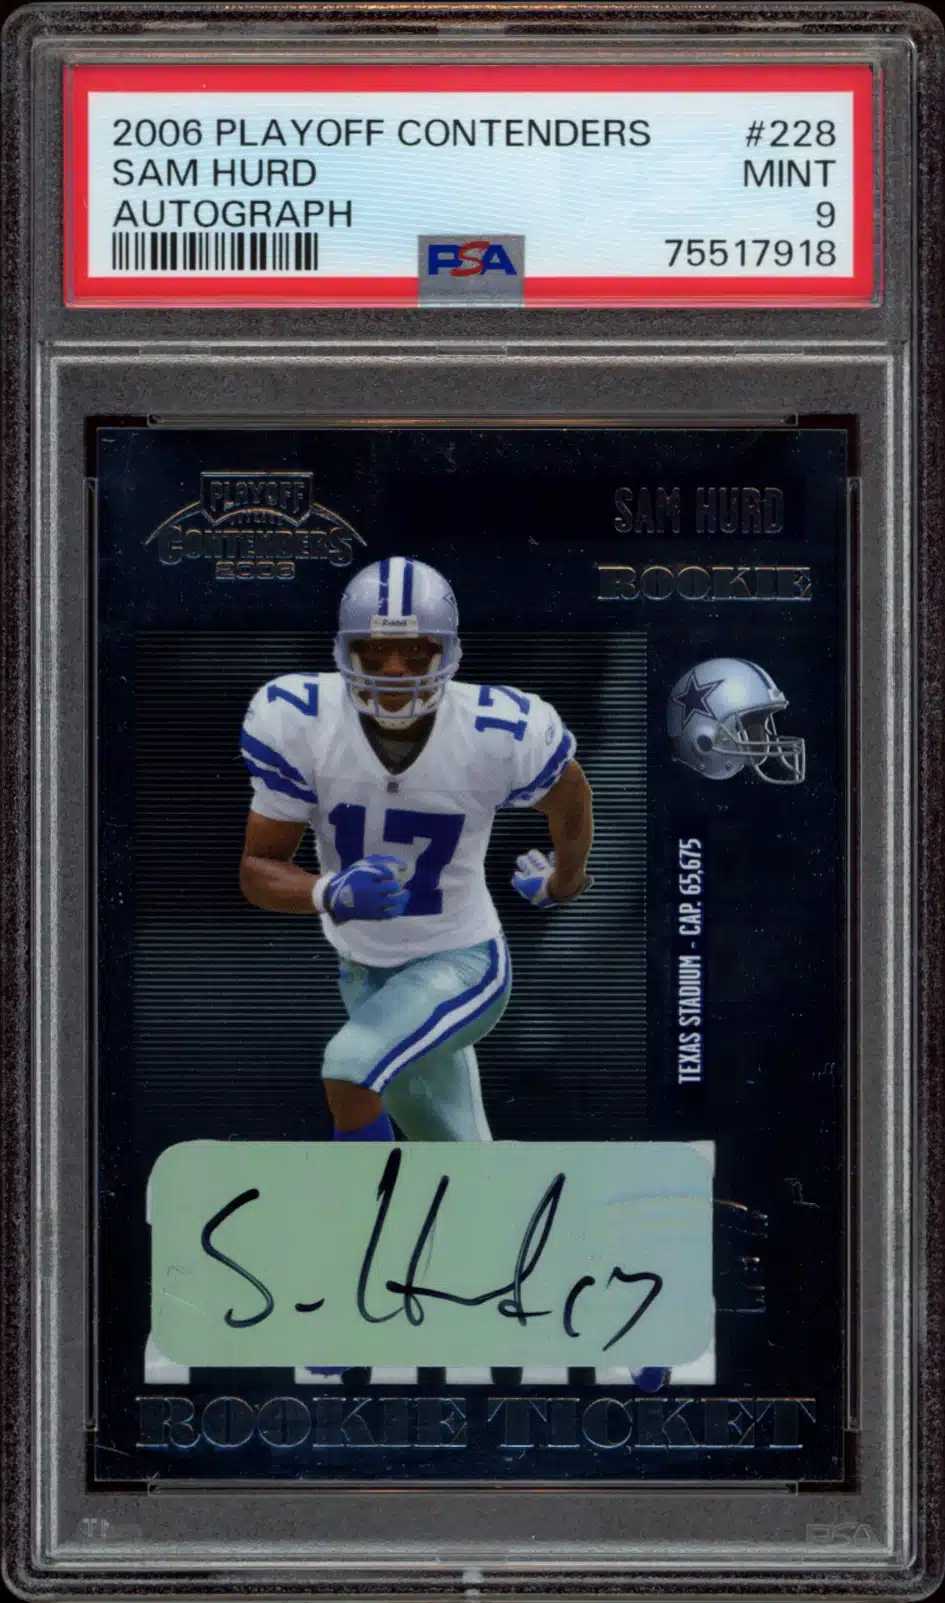 2006 Playoff Contenders Sam Hurd #228 (Auto) (PSA 9) (Front)